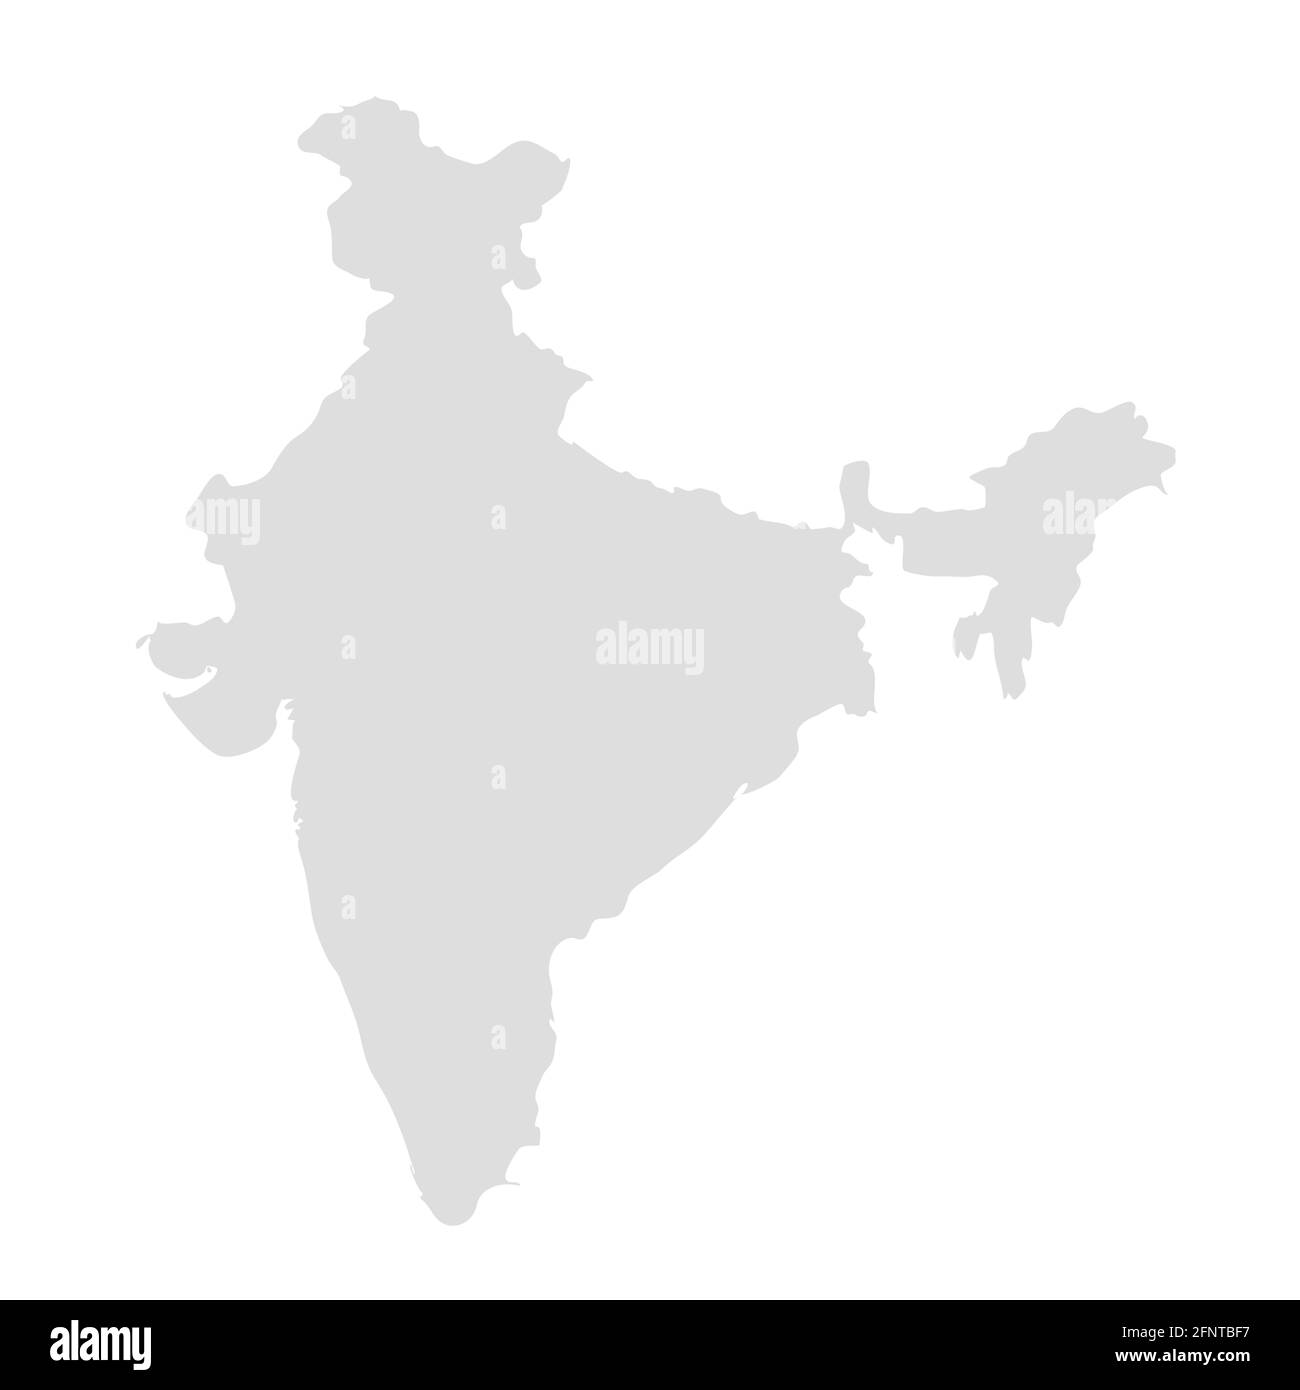 India vector map illustration. India world background isolated Stock Vector